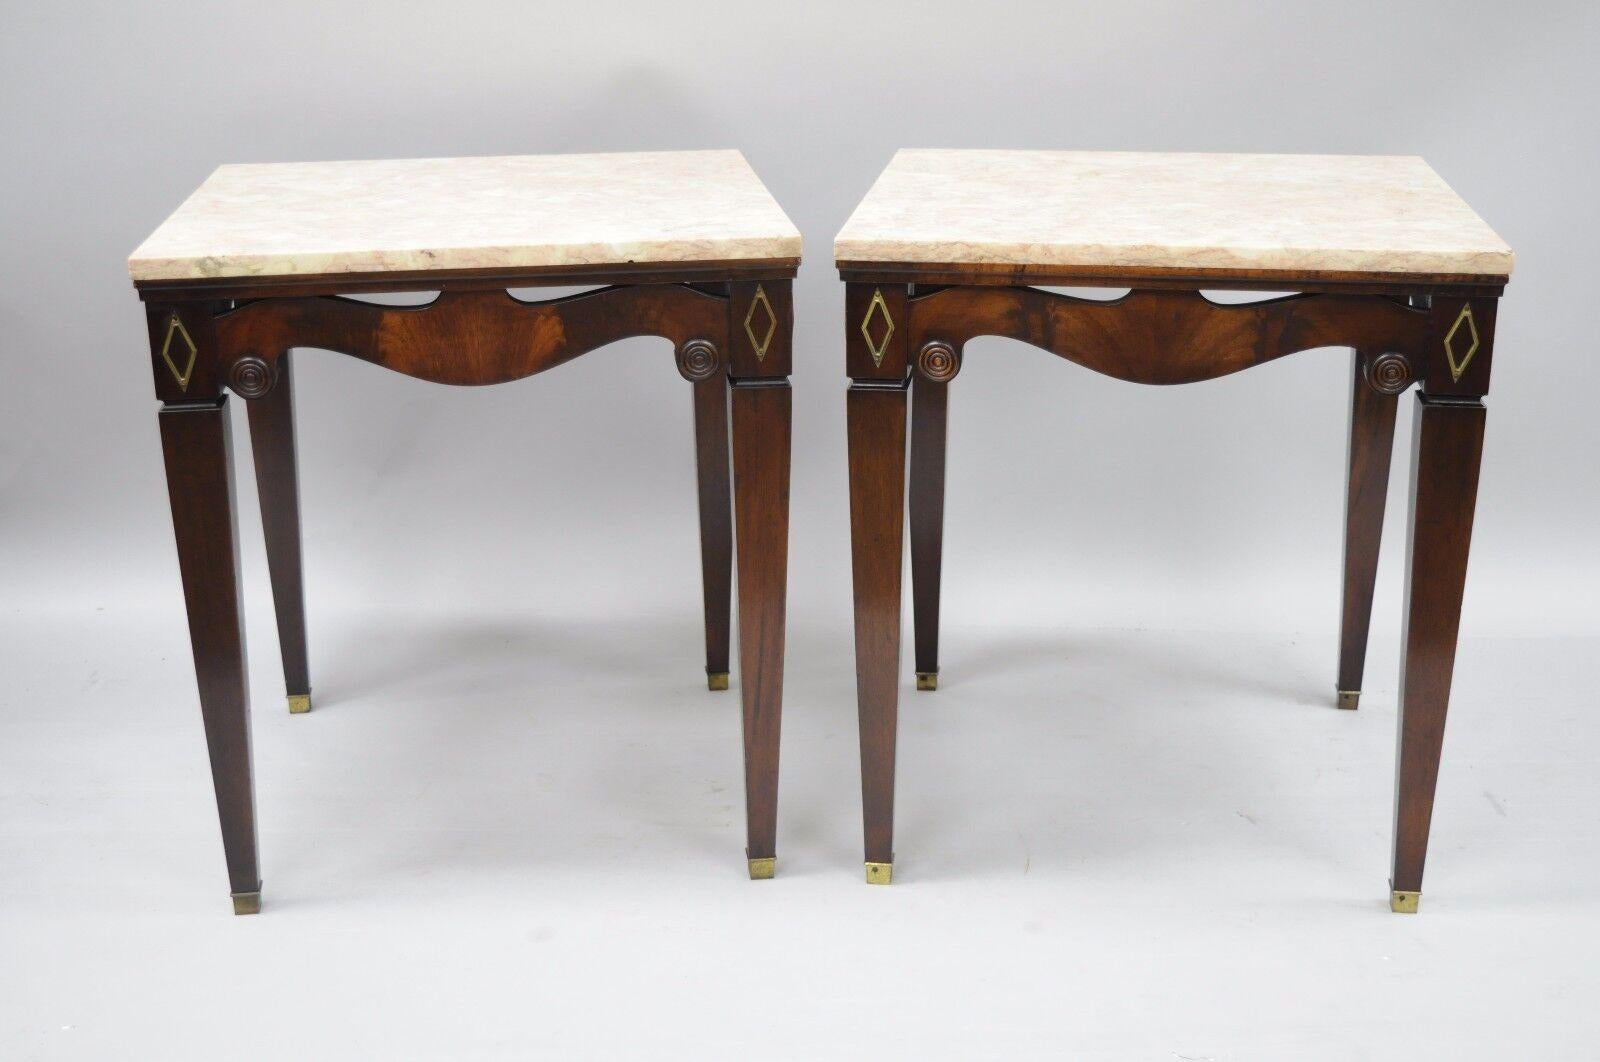 Pair of antique pink marble-top mahogany end tables in the Regency style. Possibly by Weiman. Unmarked. Item features pink square marble tops, flame mahogany veneer, pierce carved skirt, wood construction, beautiful wood-grain, brass accents, felt